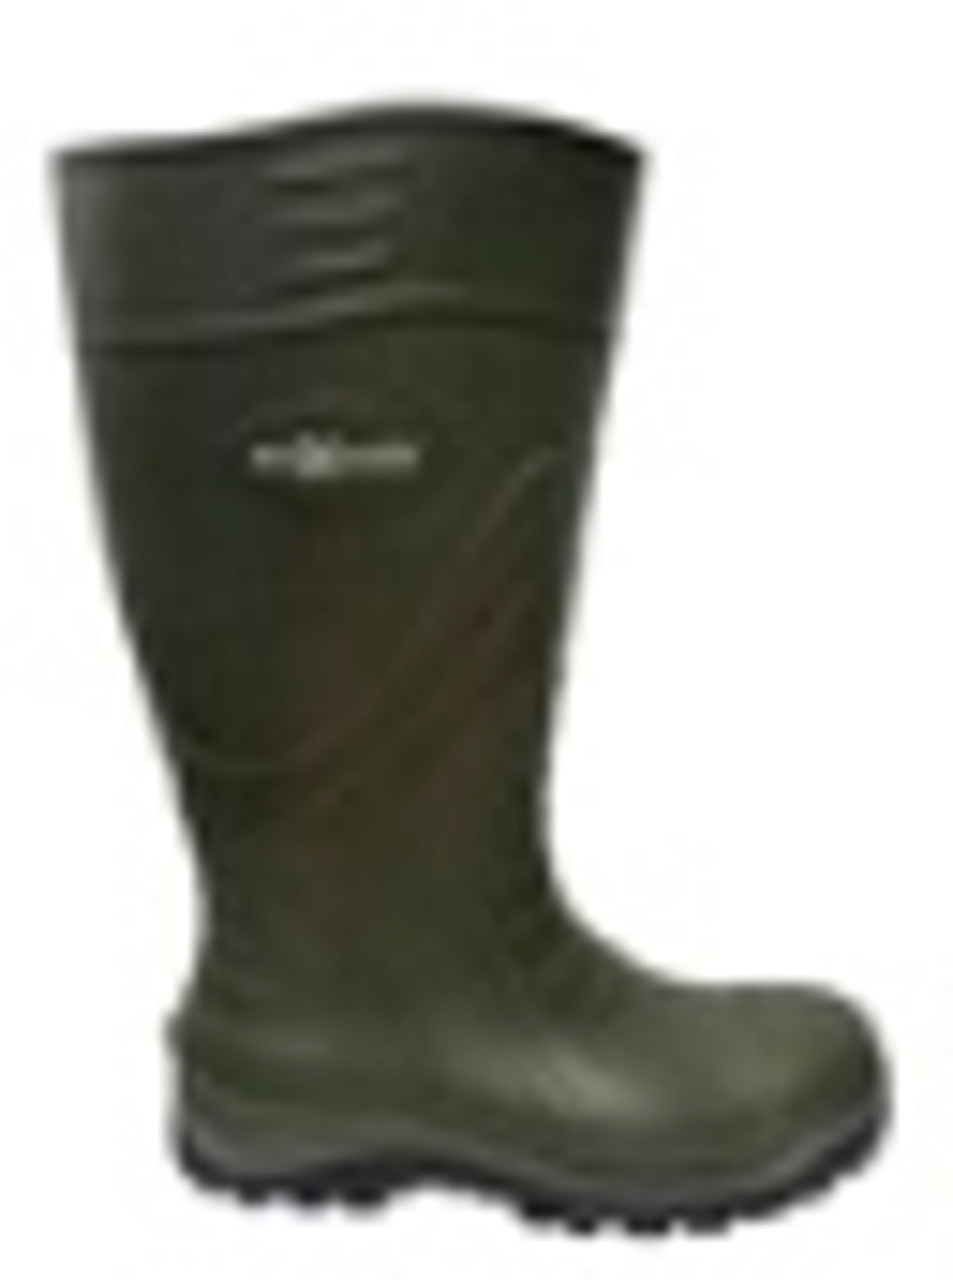 Patrol Green Pu Boot W/ Safety Toe, Size 3